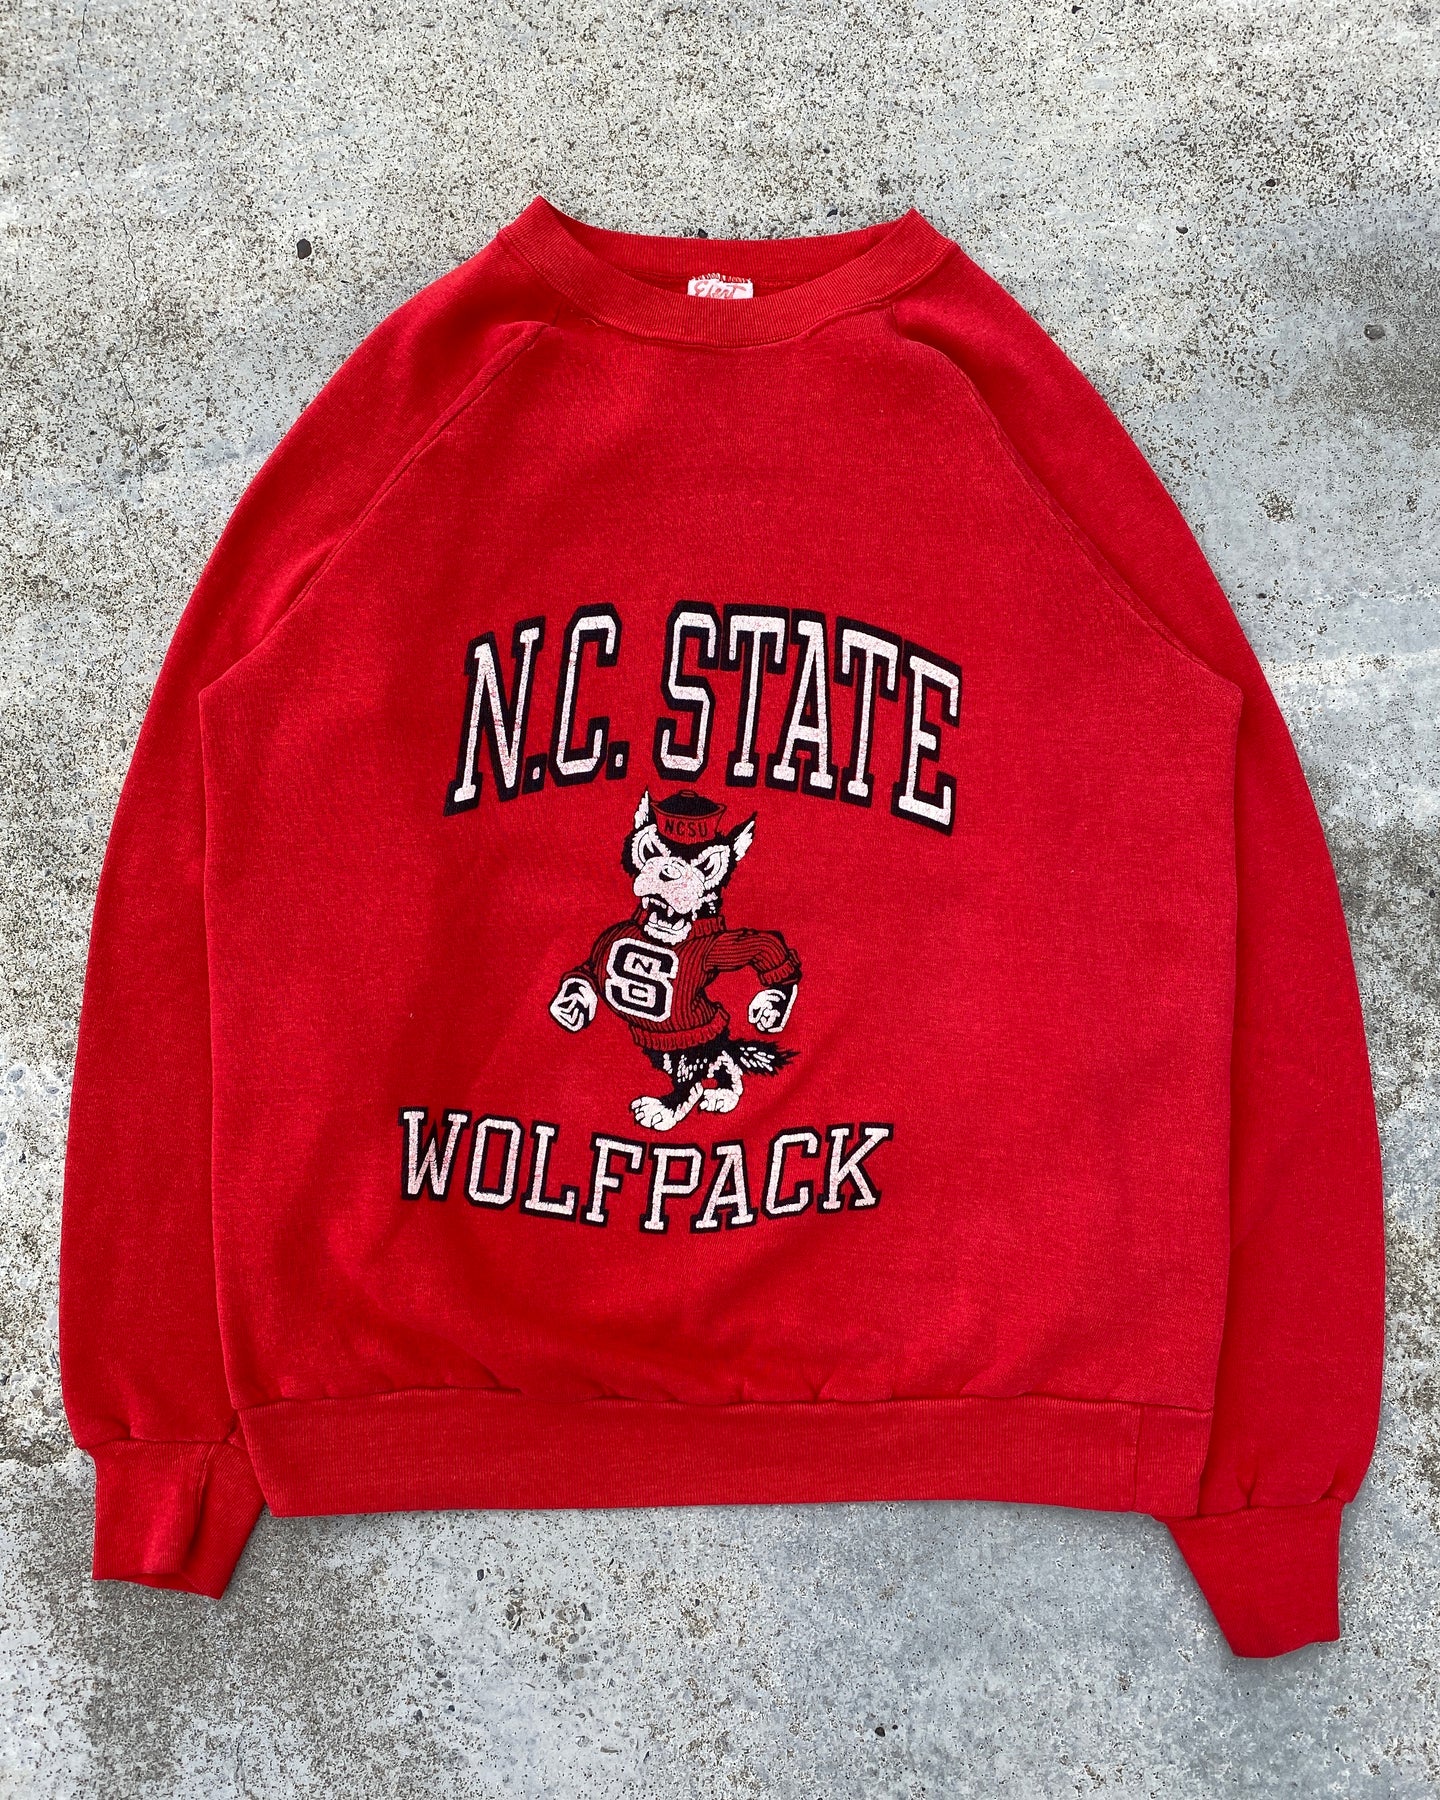 1970s/1980s NC State Wolfpack Collegiate Raglan Sweat - Size Large